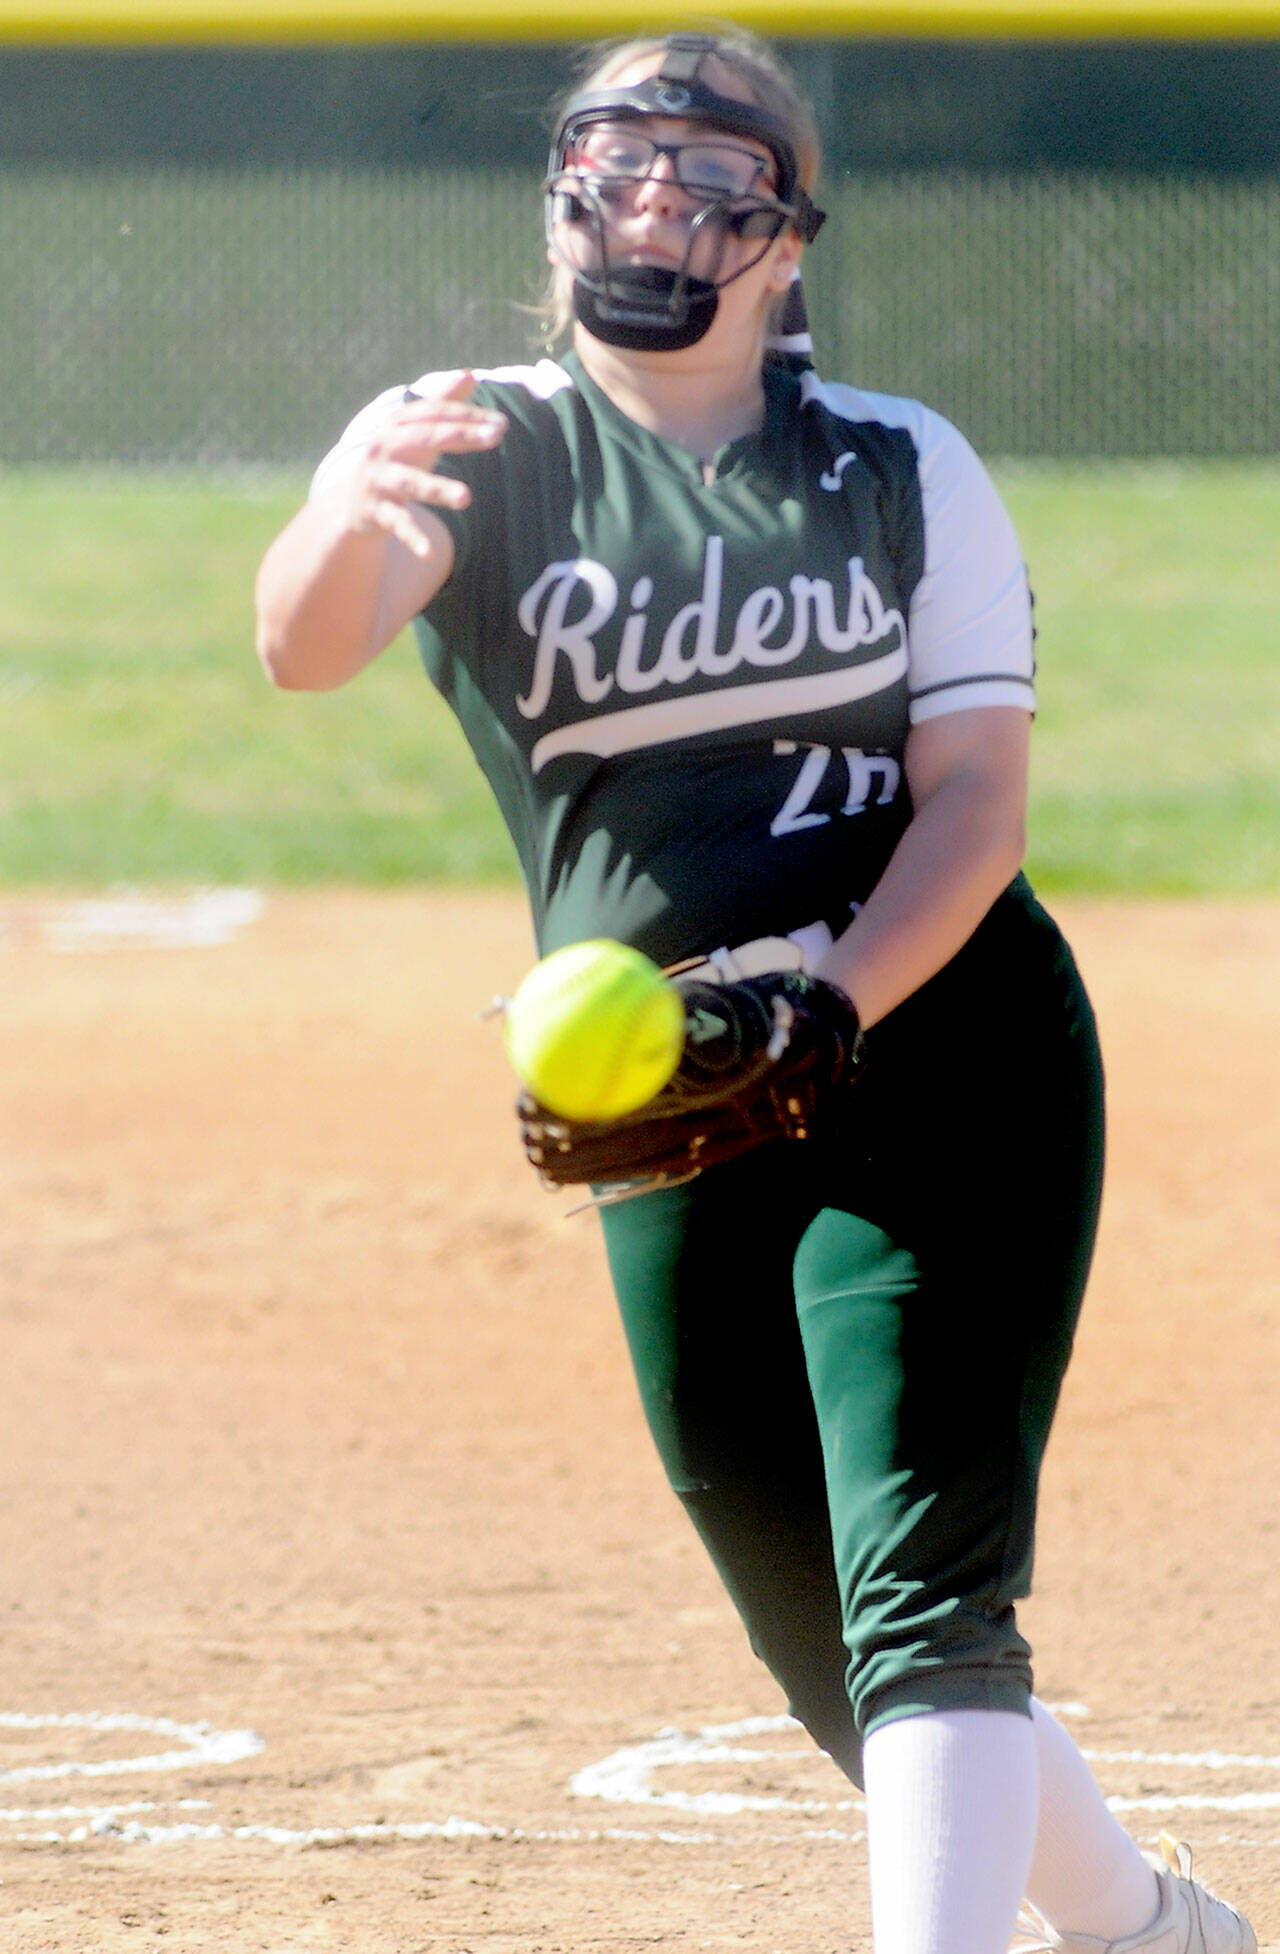 Port Angeles pitcher Cheyenne Zimmer throws in the first inning against Sequim on Friday afternoon in Port Angeles. She struck out 10 in an 8-1 victory. (Keith Thorpe/Peninsula Daily News)